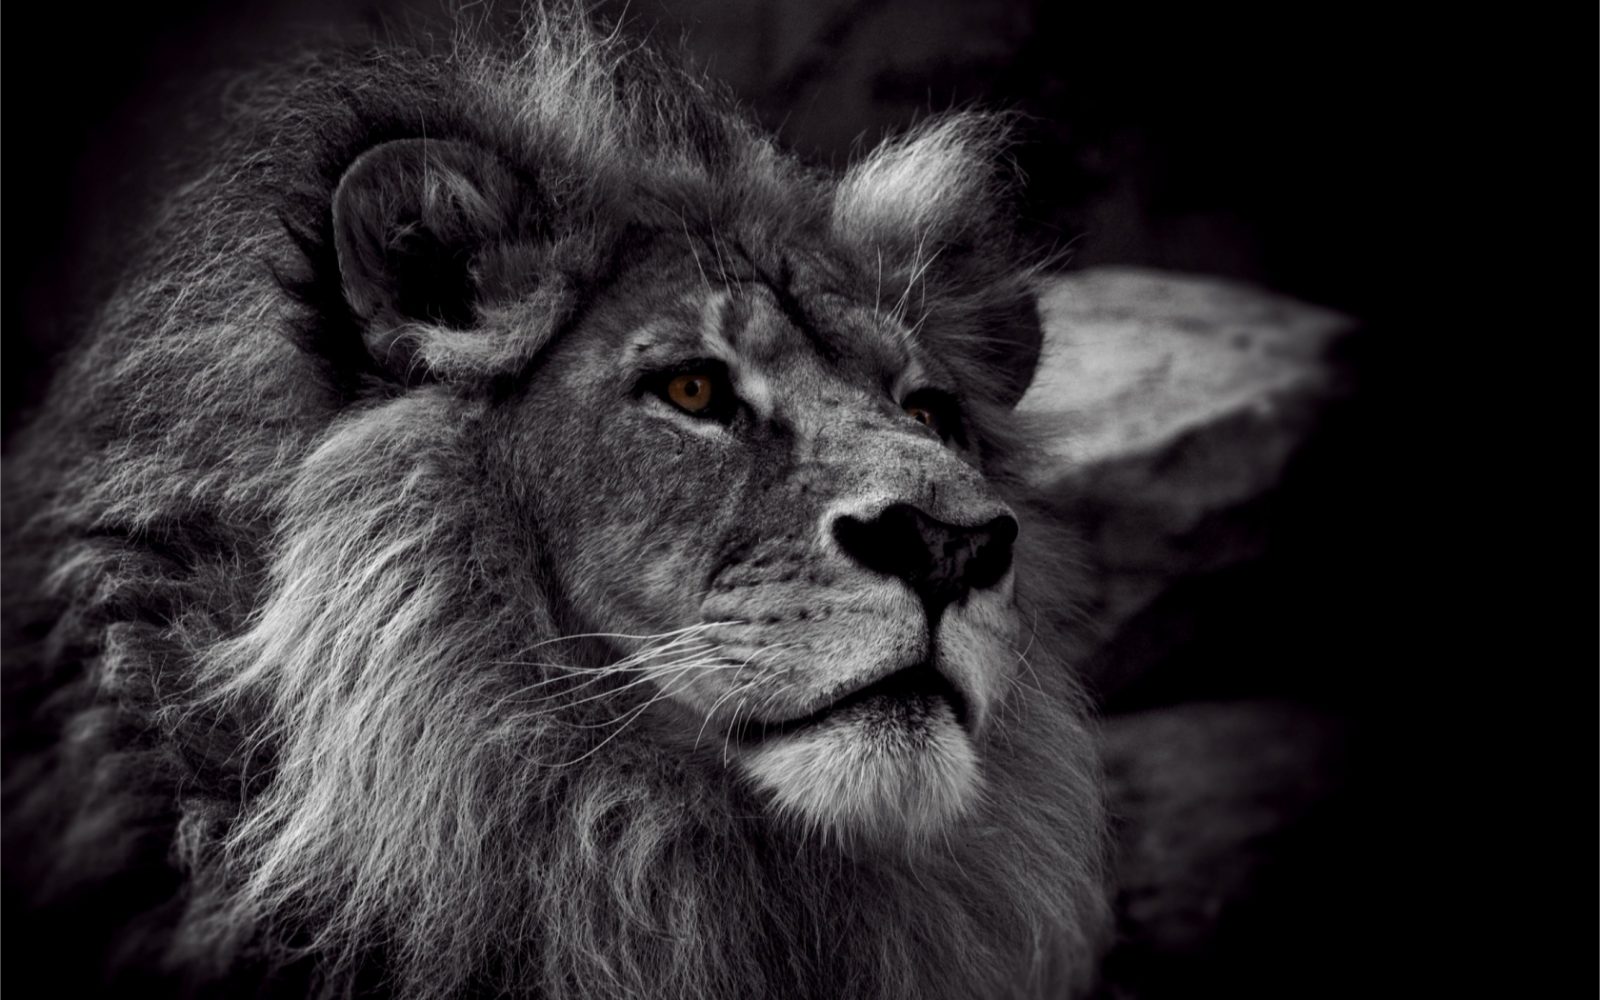 Cecil the Lion killed in 2015